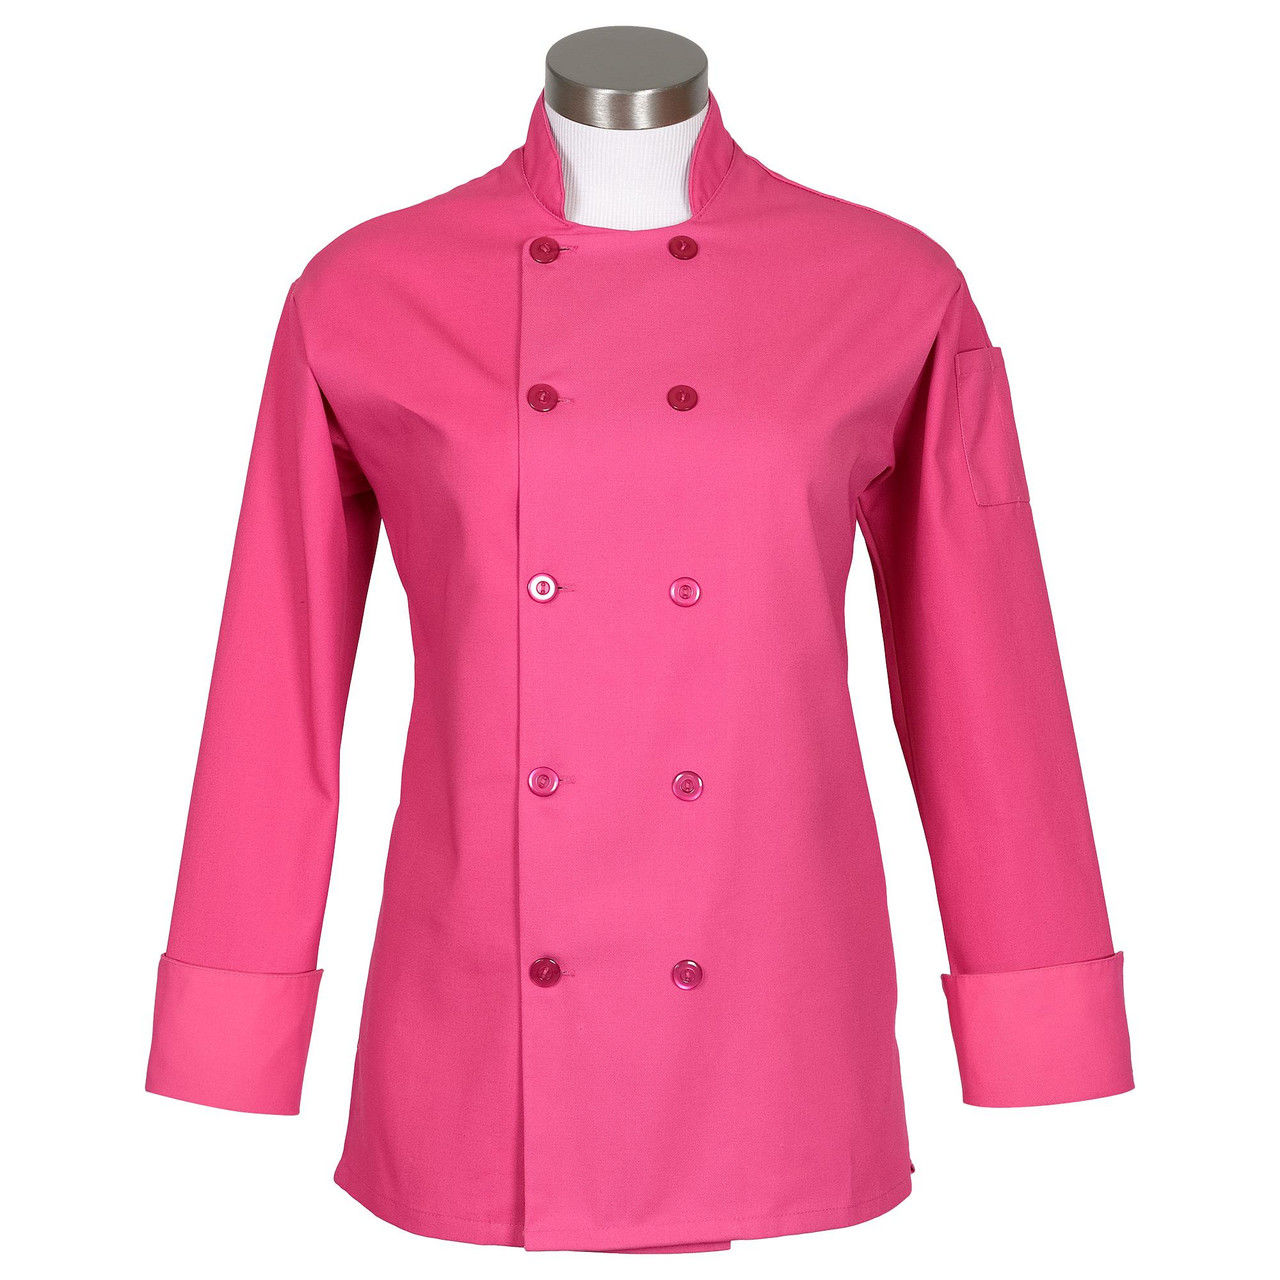 Does the chef coats womens long sleeve have any pockets?